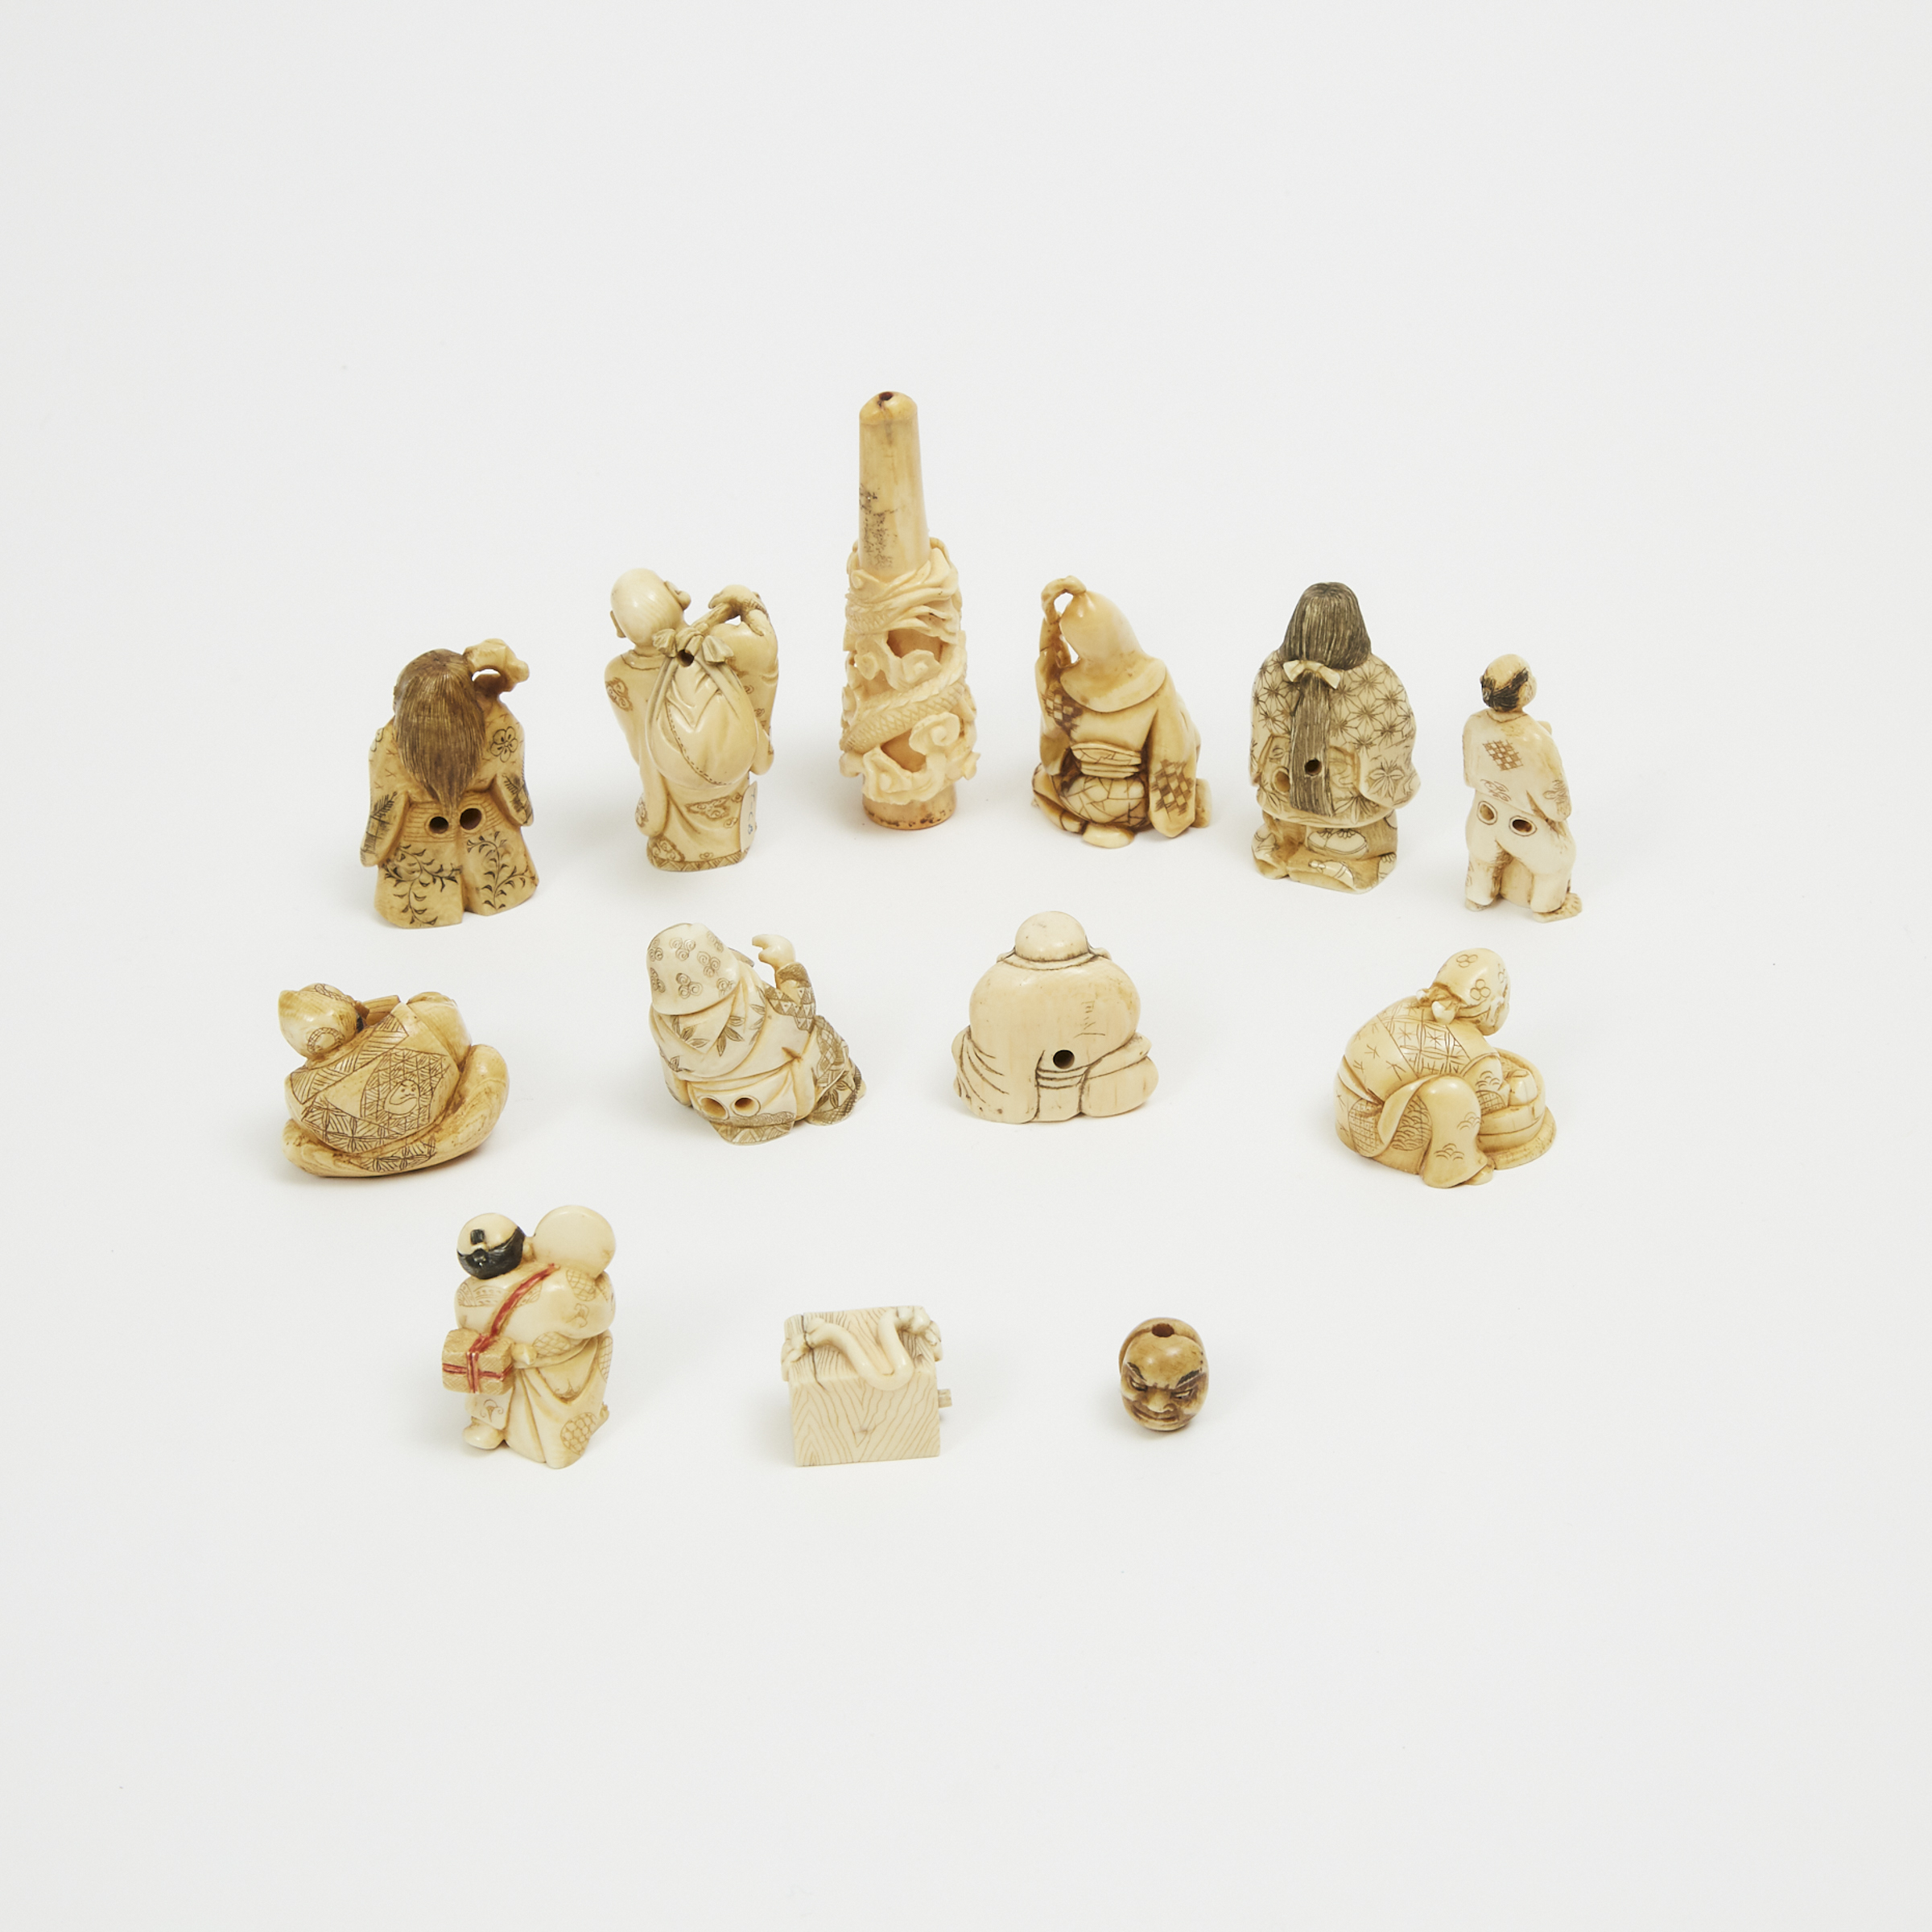 A Group of Thirteen Small Japanese Ivory Carvings